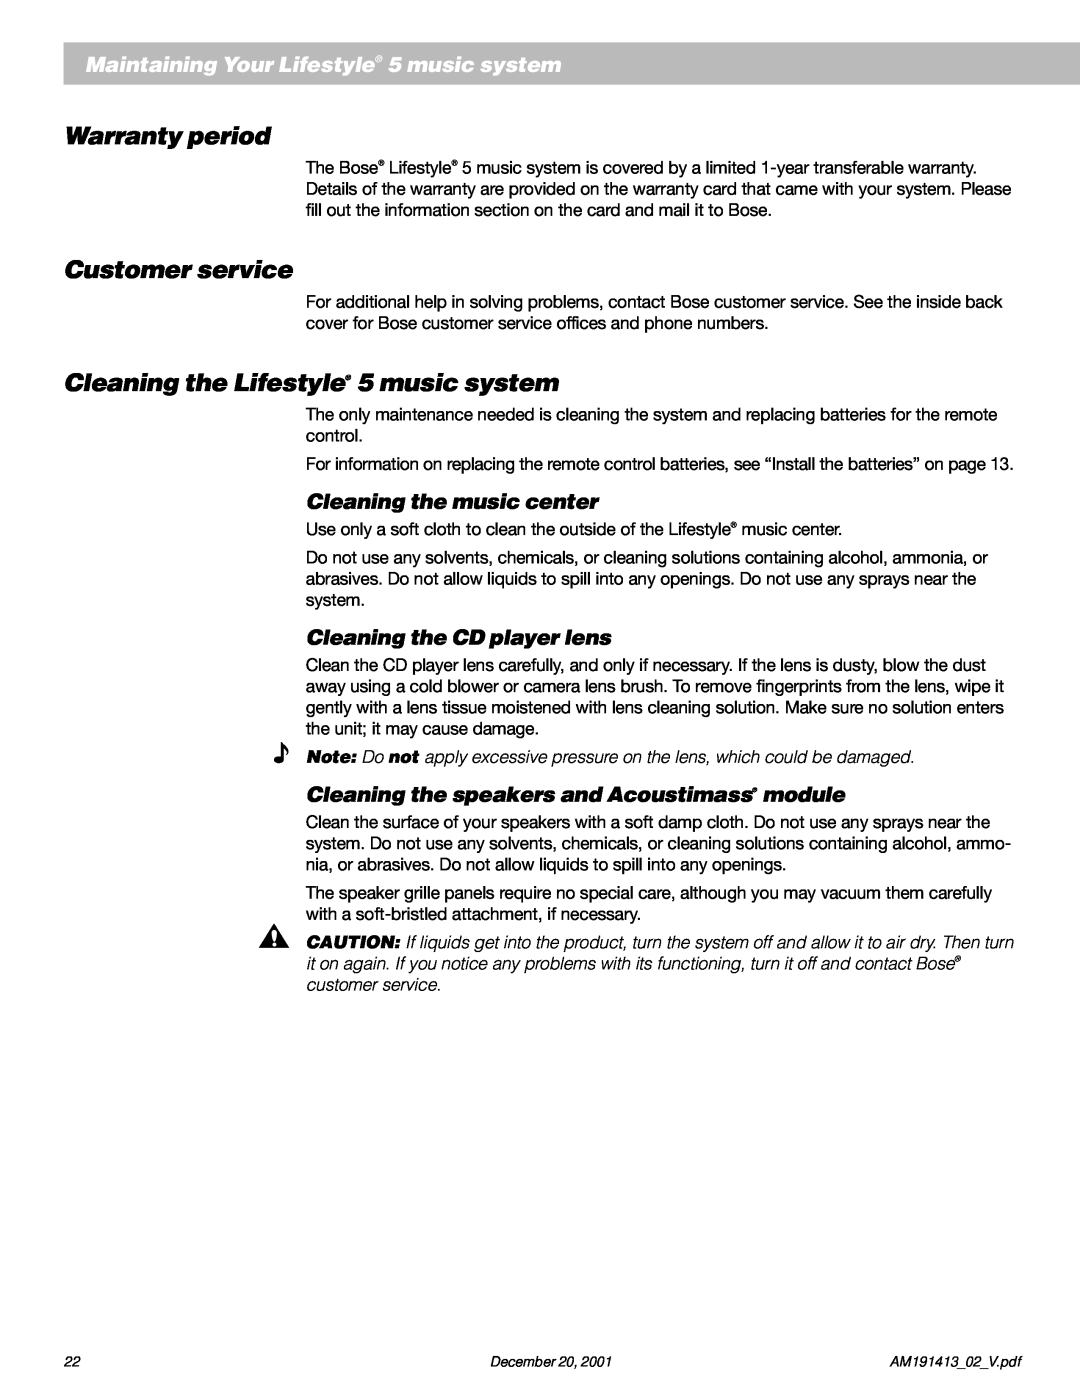 Bose manual Warranty period, Customer service, Cleaning the Lifestyle 5 music system, Cleaning the music center 